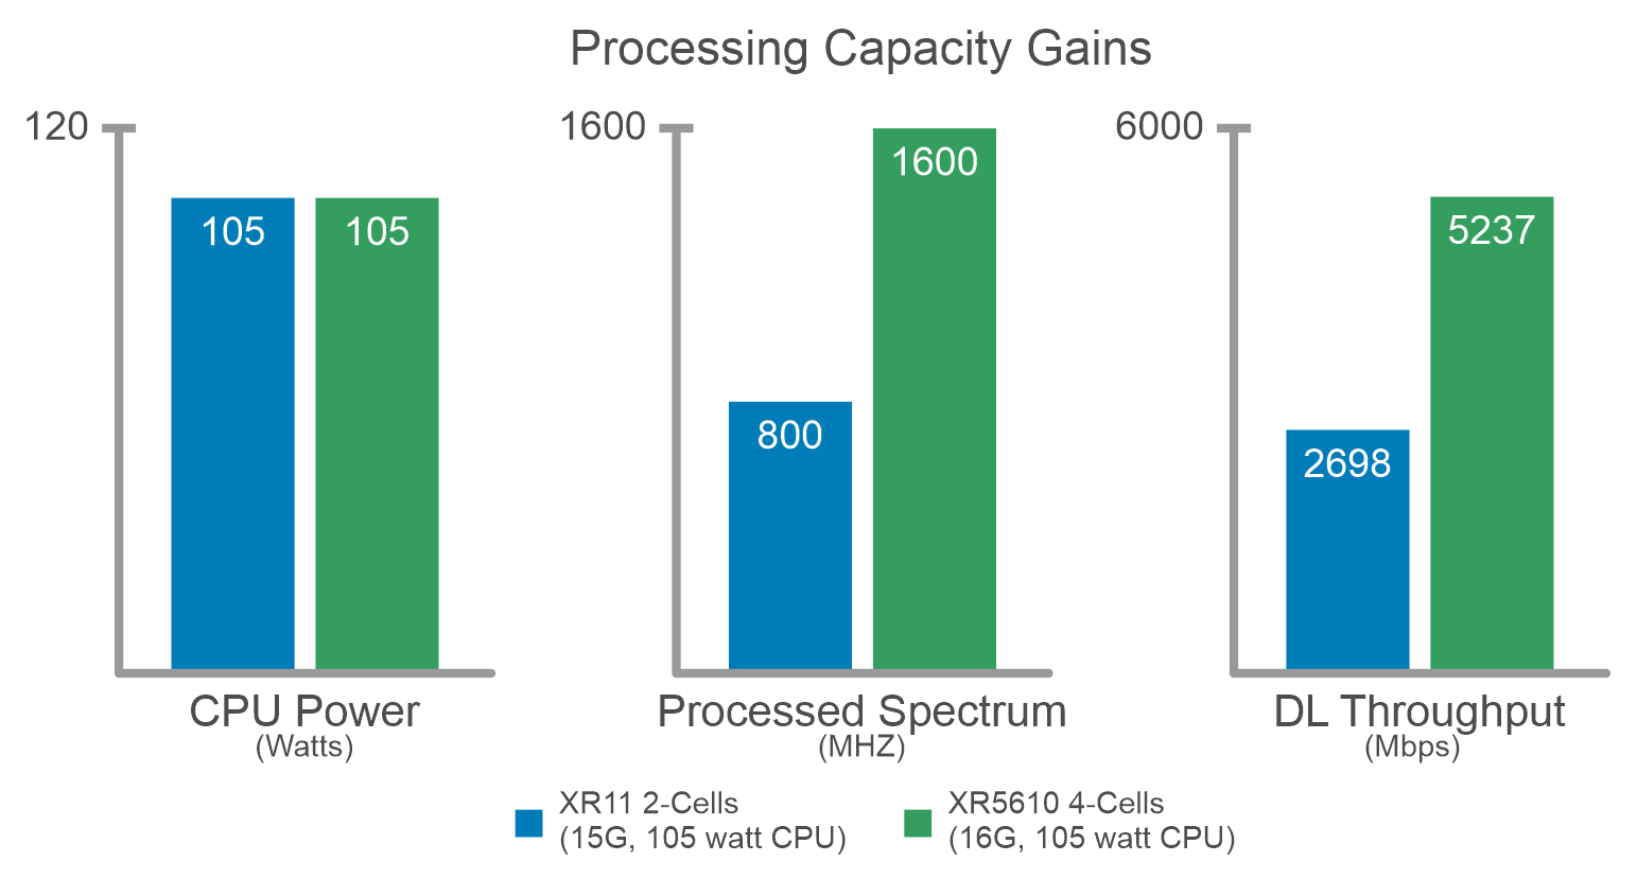 Figure 9 shows the processing capacity gains during processing 5.24 Gbps of user traffic at the same CPU power consumption. 